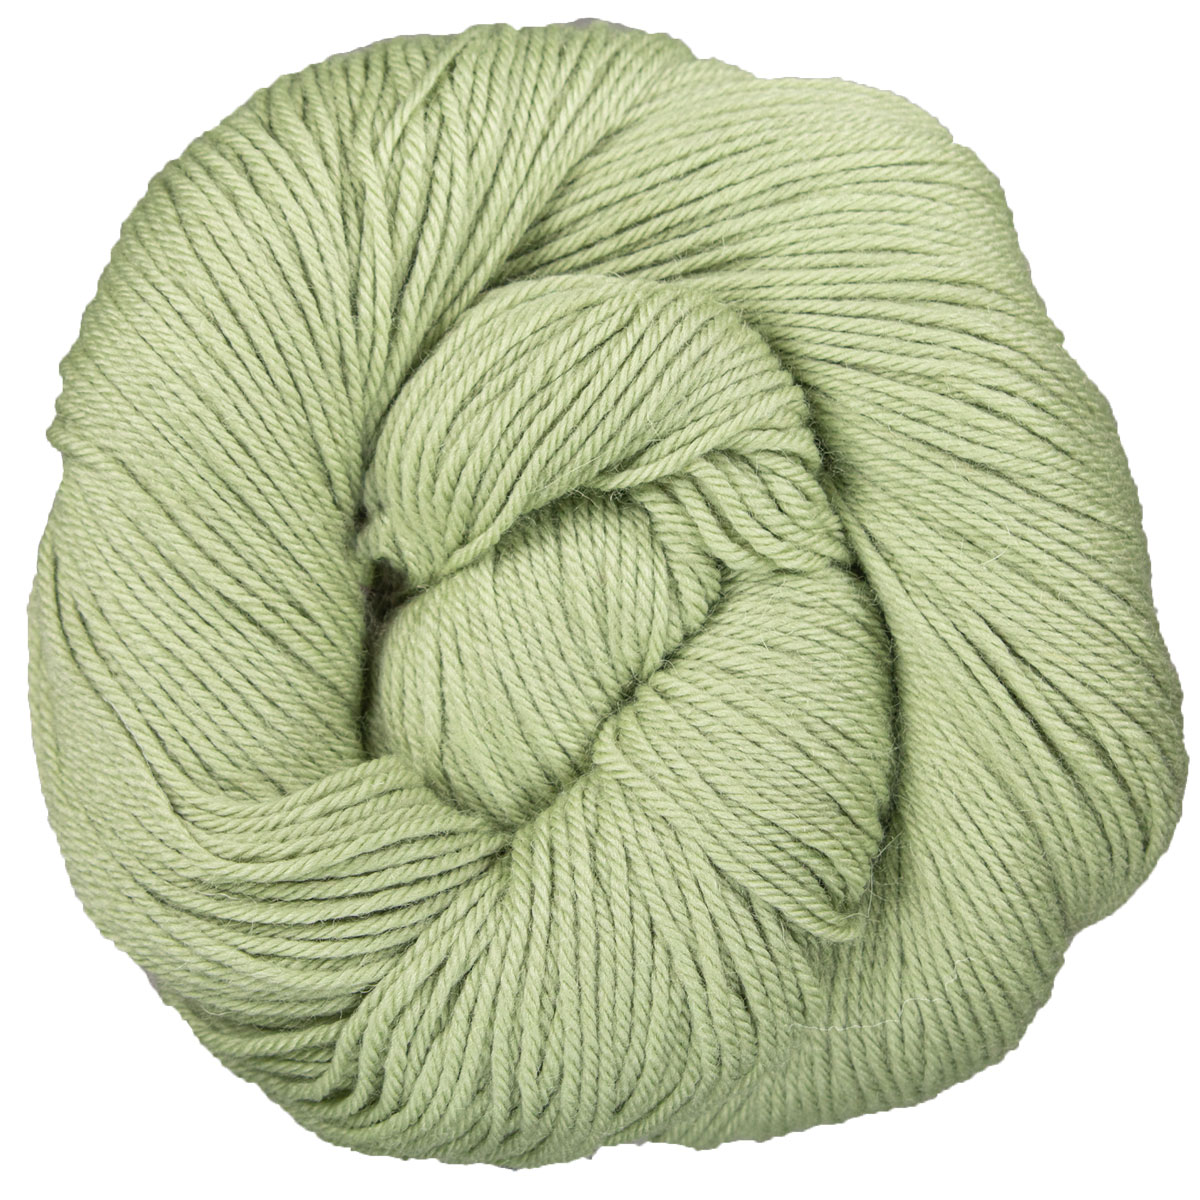 Yarn Citizen Unity Worsted Yarn - Sage at Jimmy Beans Wool